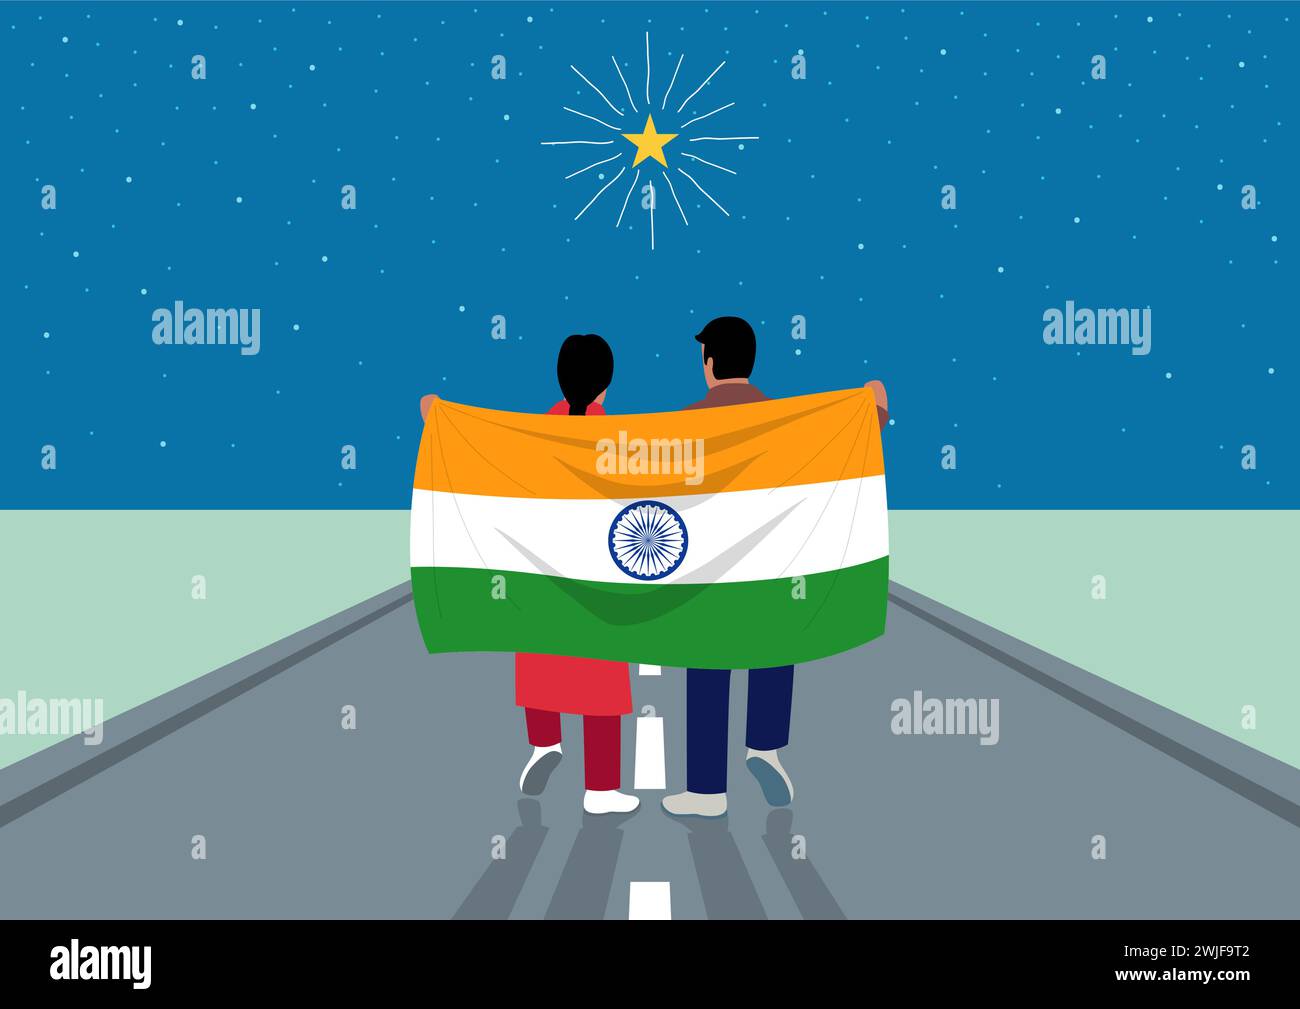 Boy and girl holding the flag of India while walking on the road to reach the stars, metaphor for welcoming a better future, optimism and ambition Stock Vector